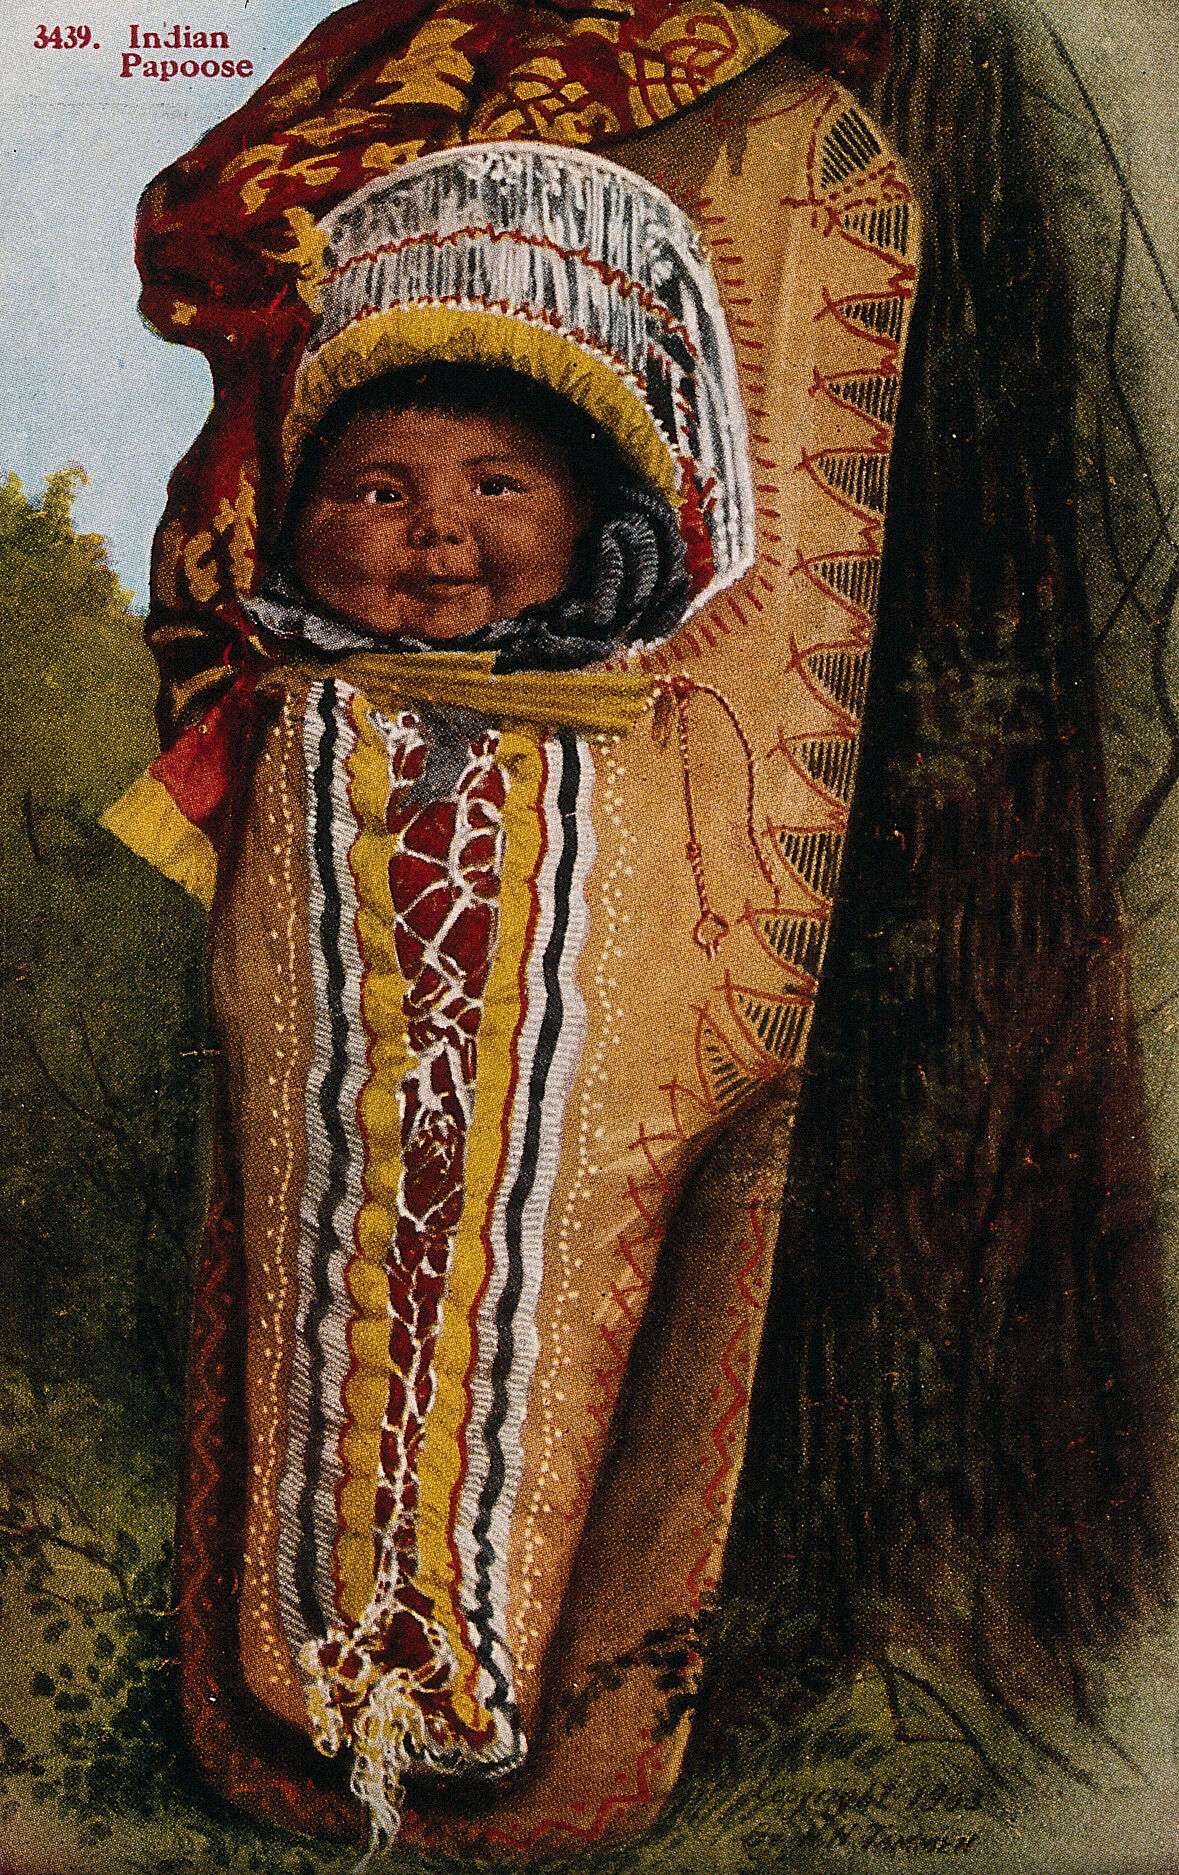 An Indian papoose in a baby carrier. Photographic postcard, ca. 1903